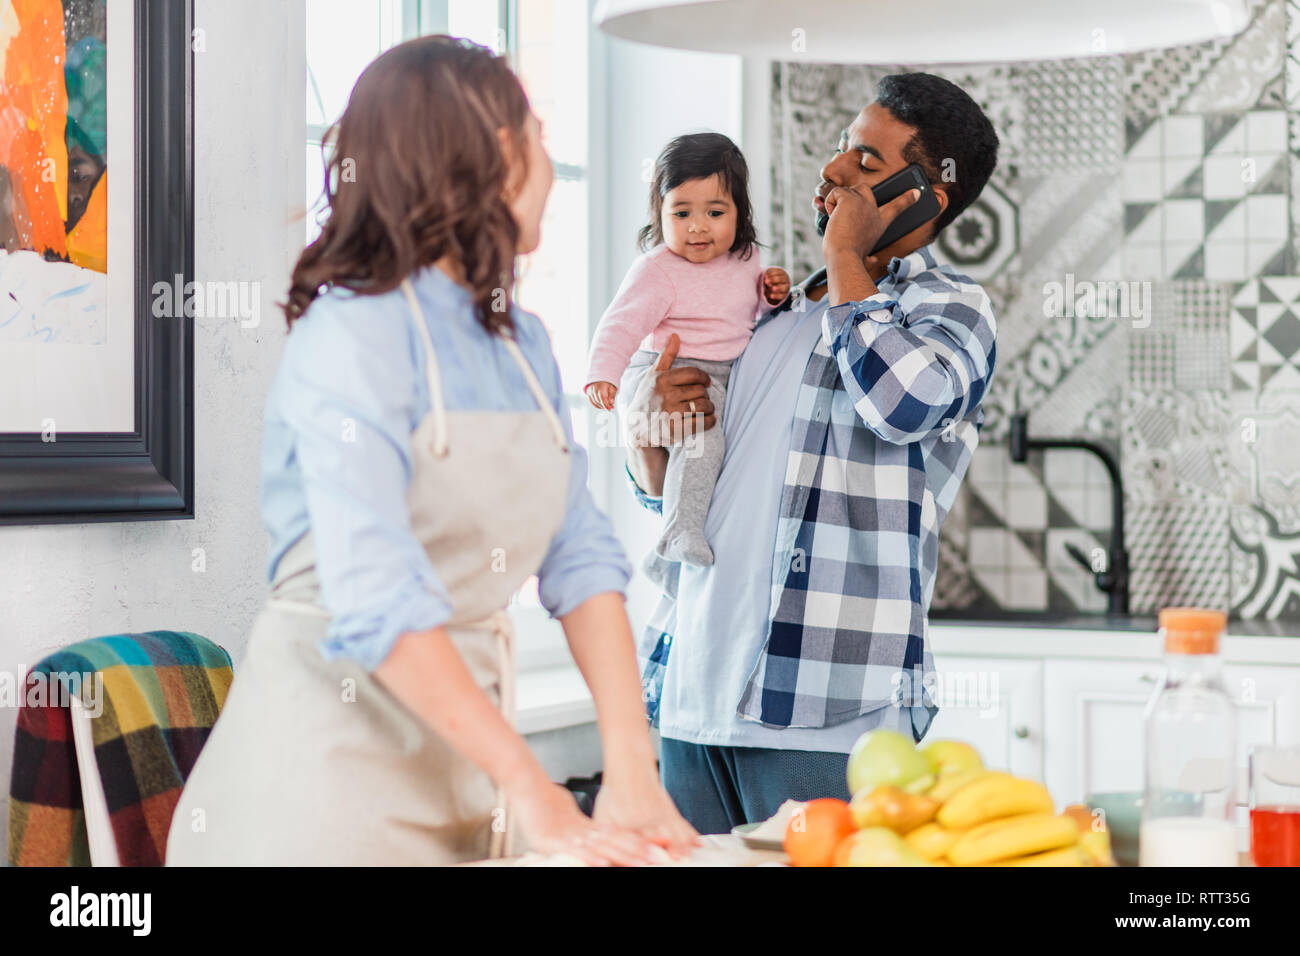 man spending holiday with family, gadget and technology concept, lifestyle Stock Photo